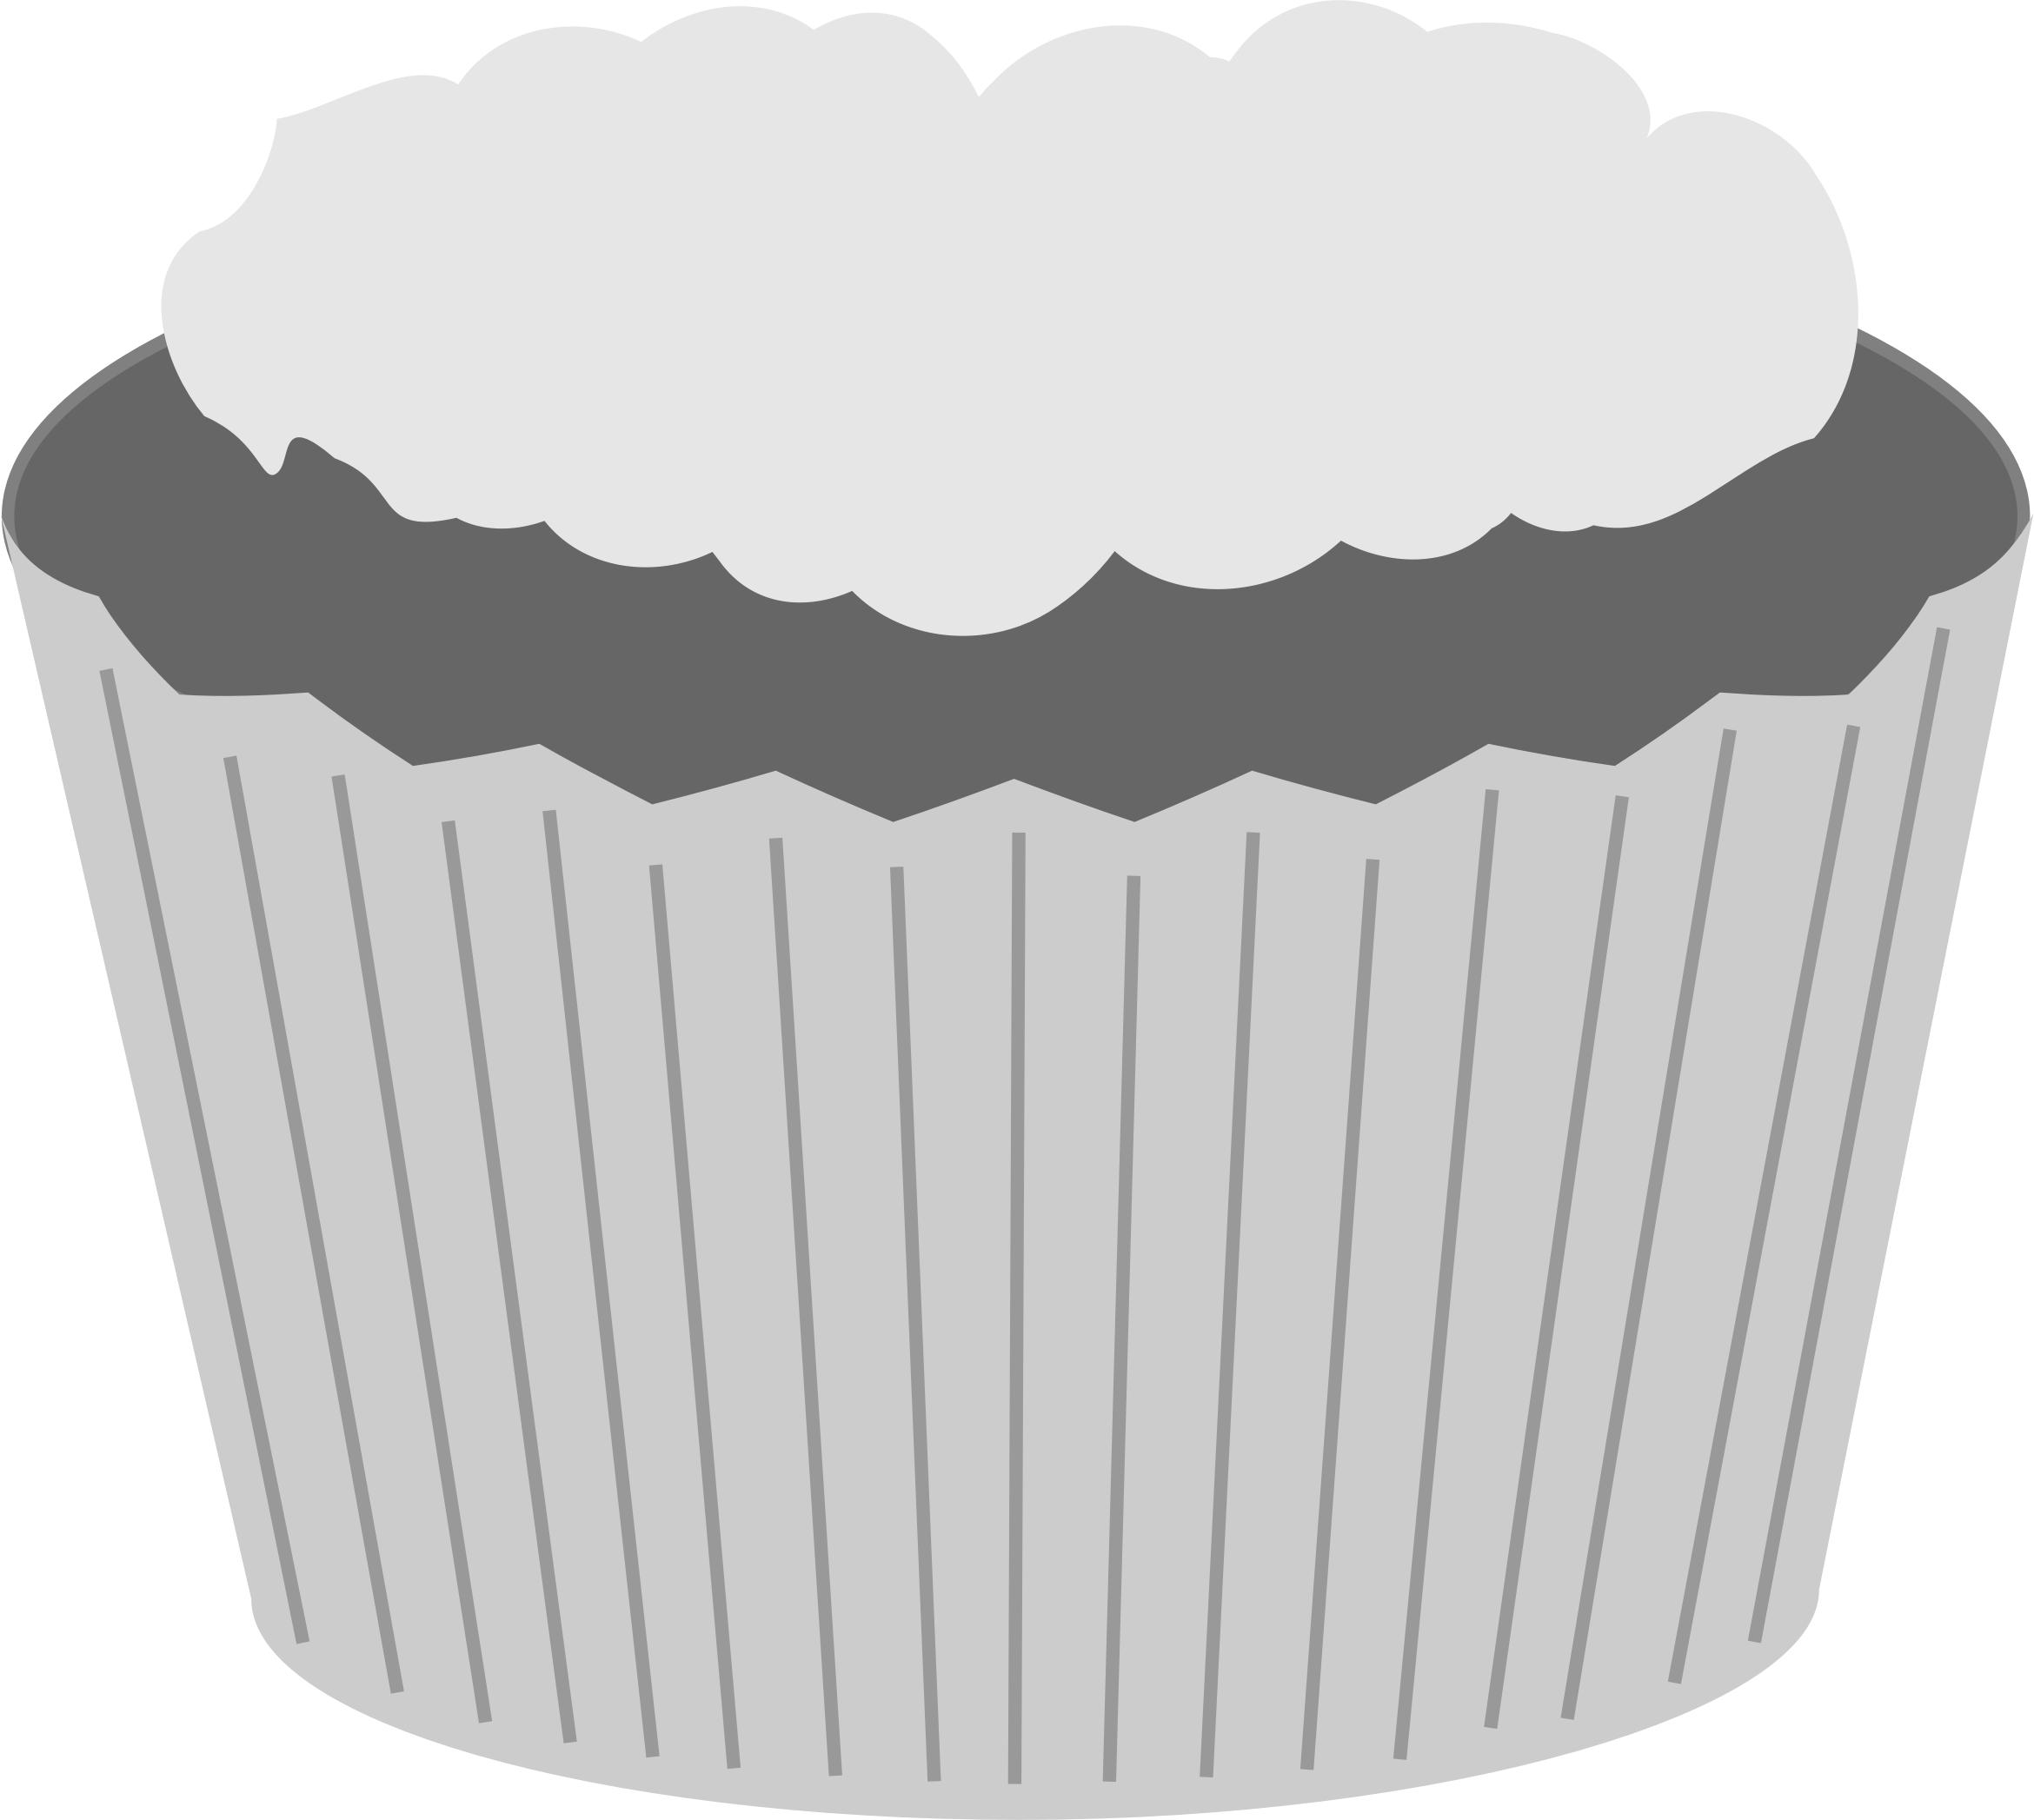 Grayscale cupcake png